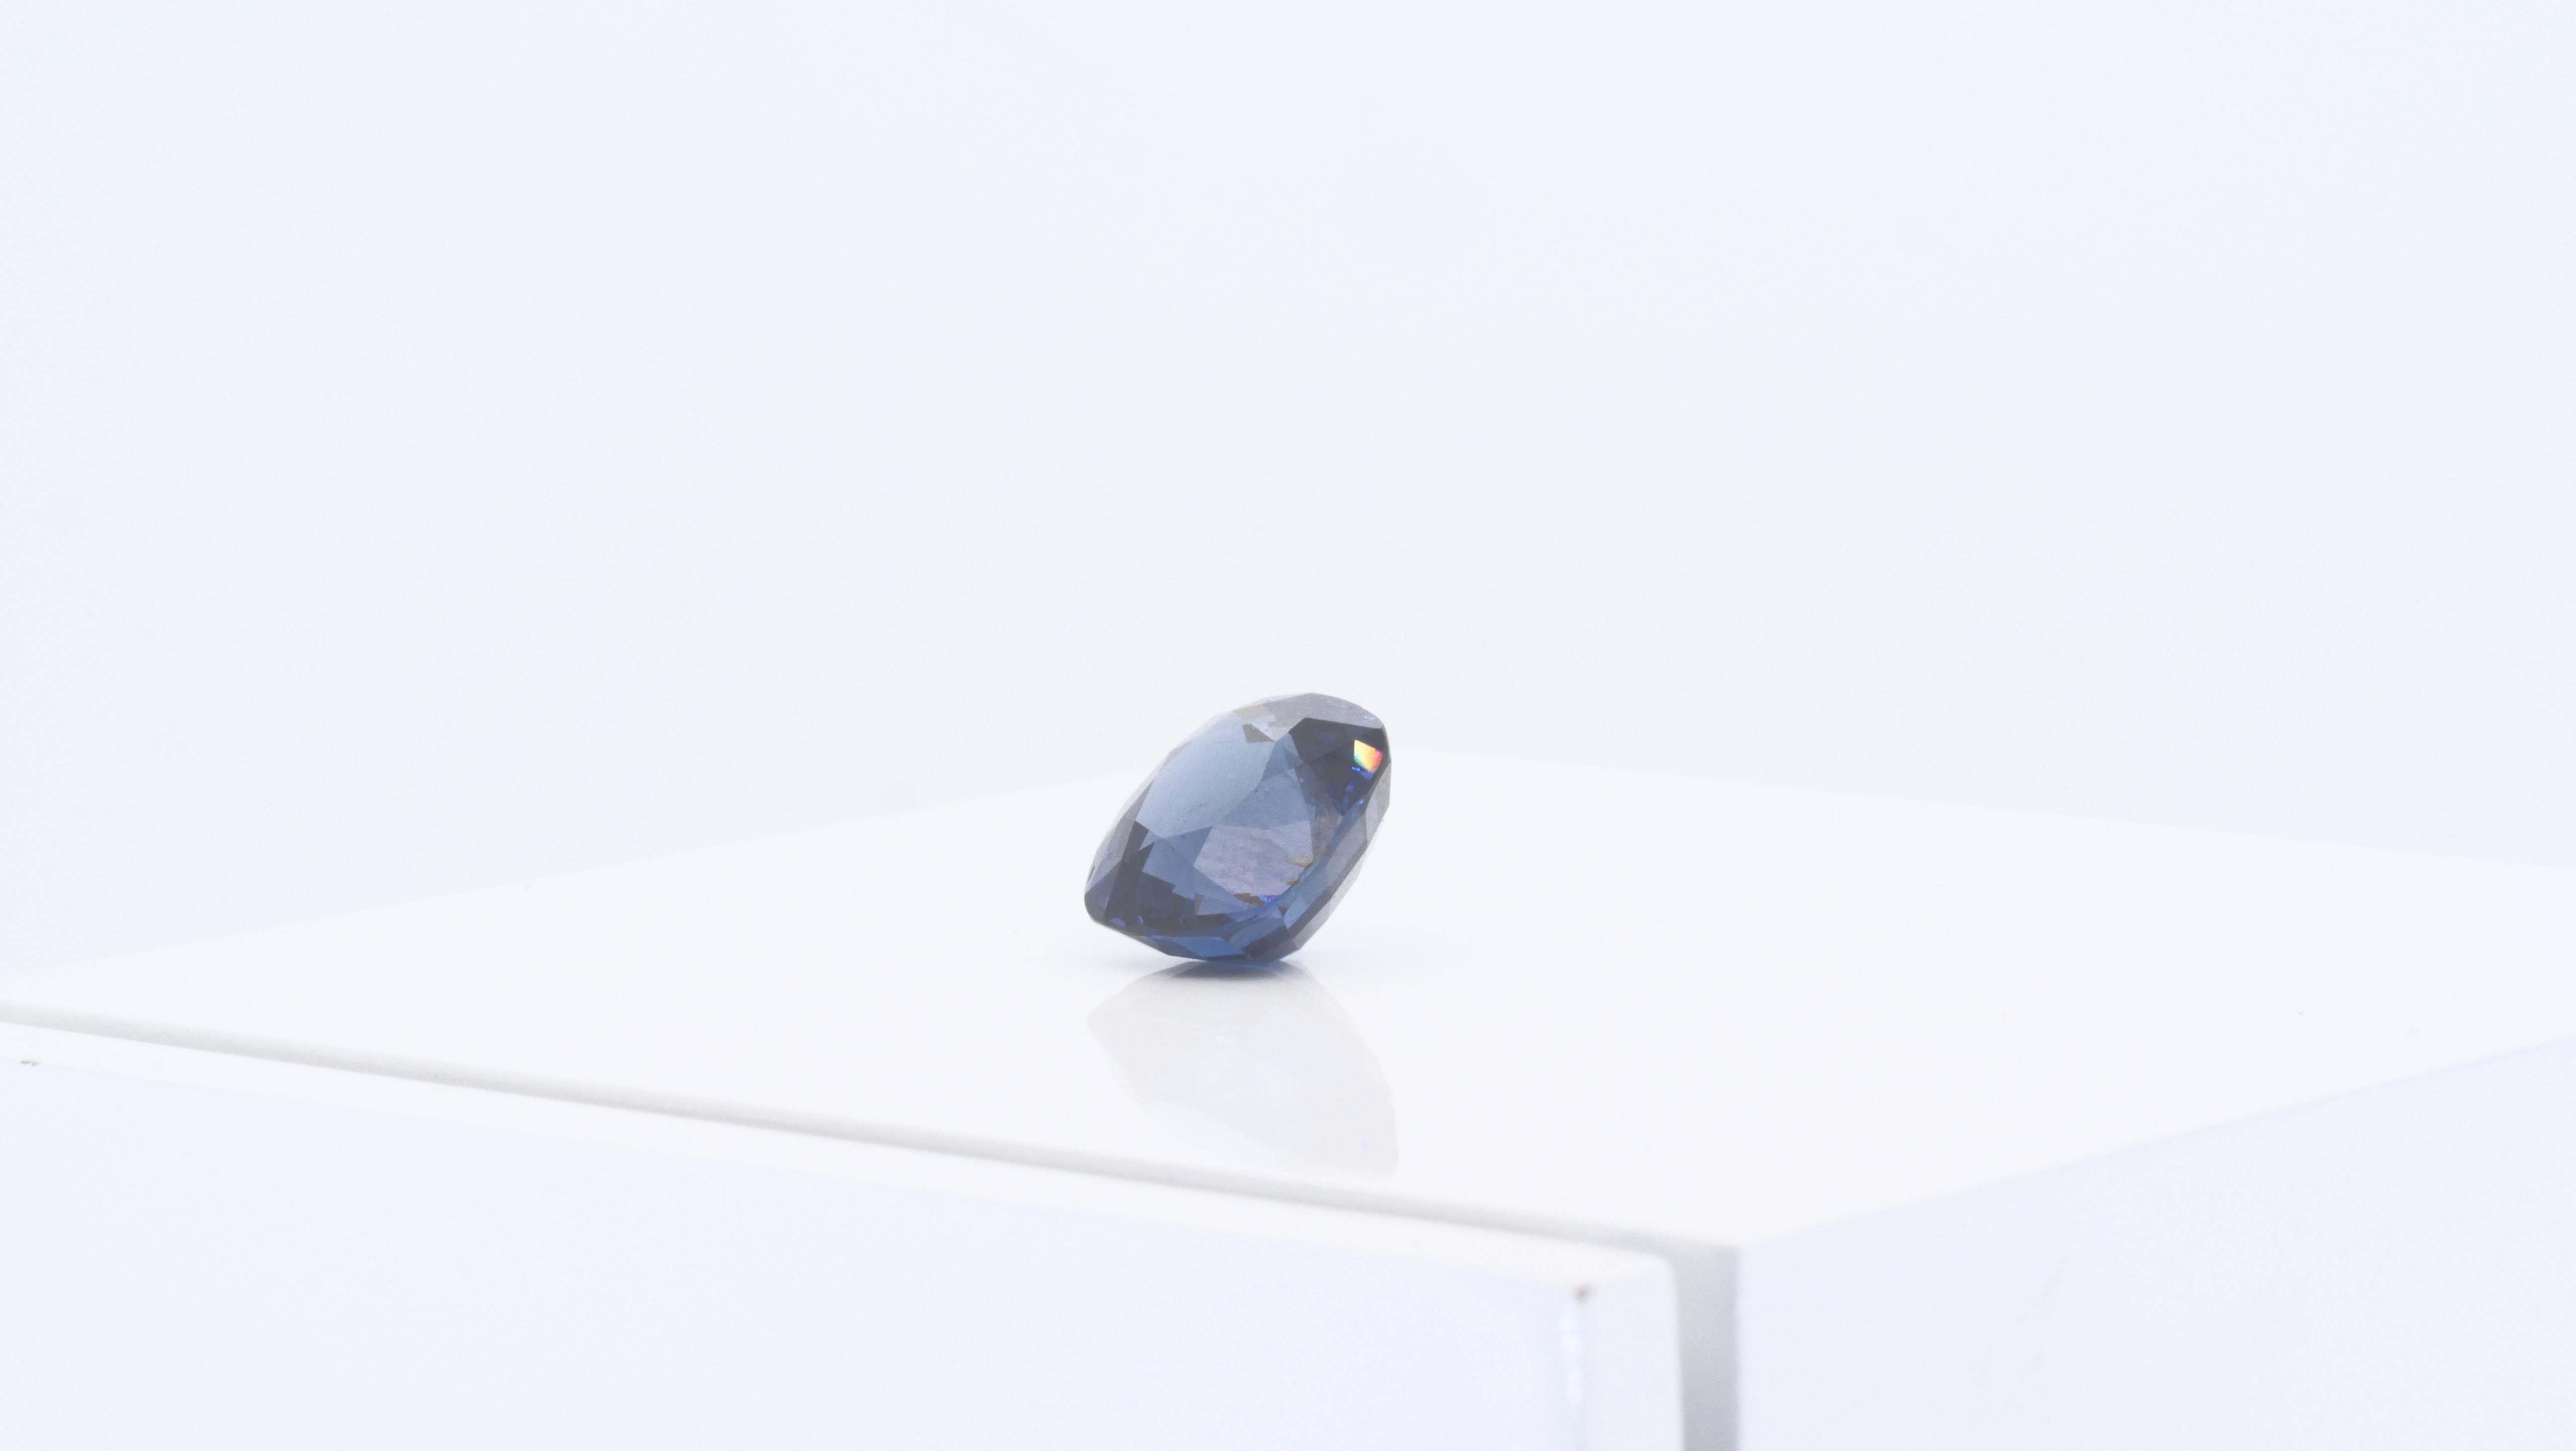 A beautiful shape gem with a dazzling natural spinel. The jewelry is made of  with a high quality polish. It comes with a fancy jewelry box.

1 spinel main stone
cut: cushion
color: blue

sku: DSPV-180984

jewelry weight: 6.13